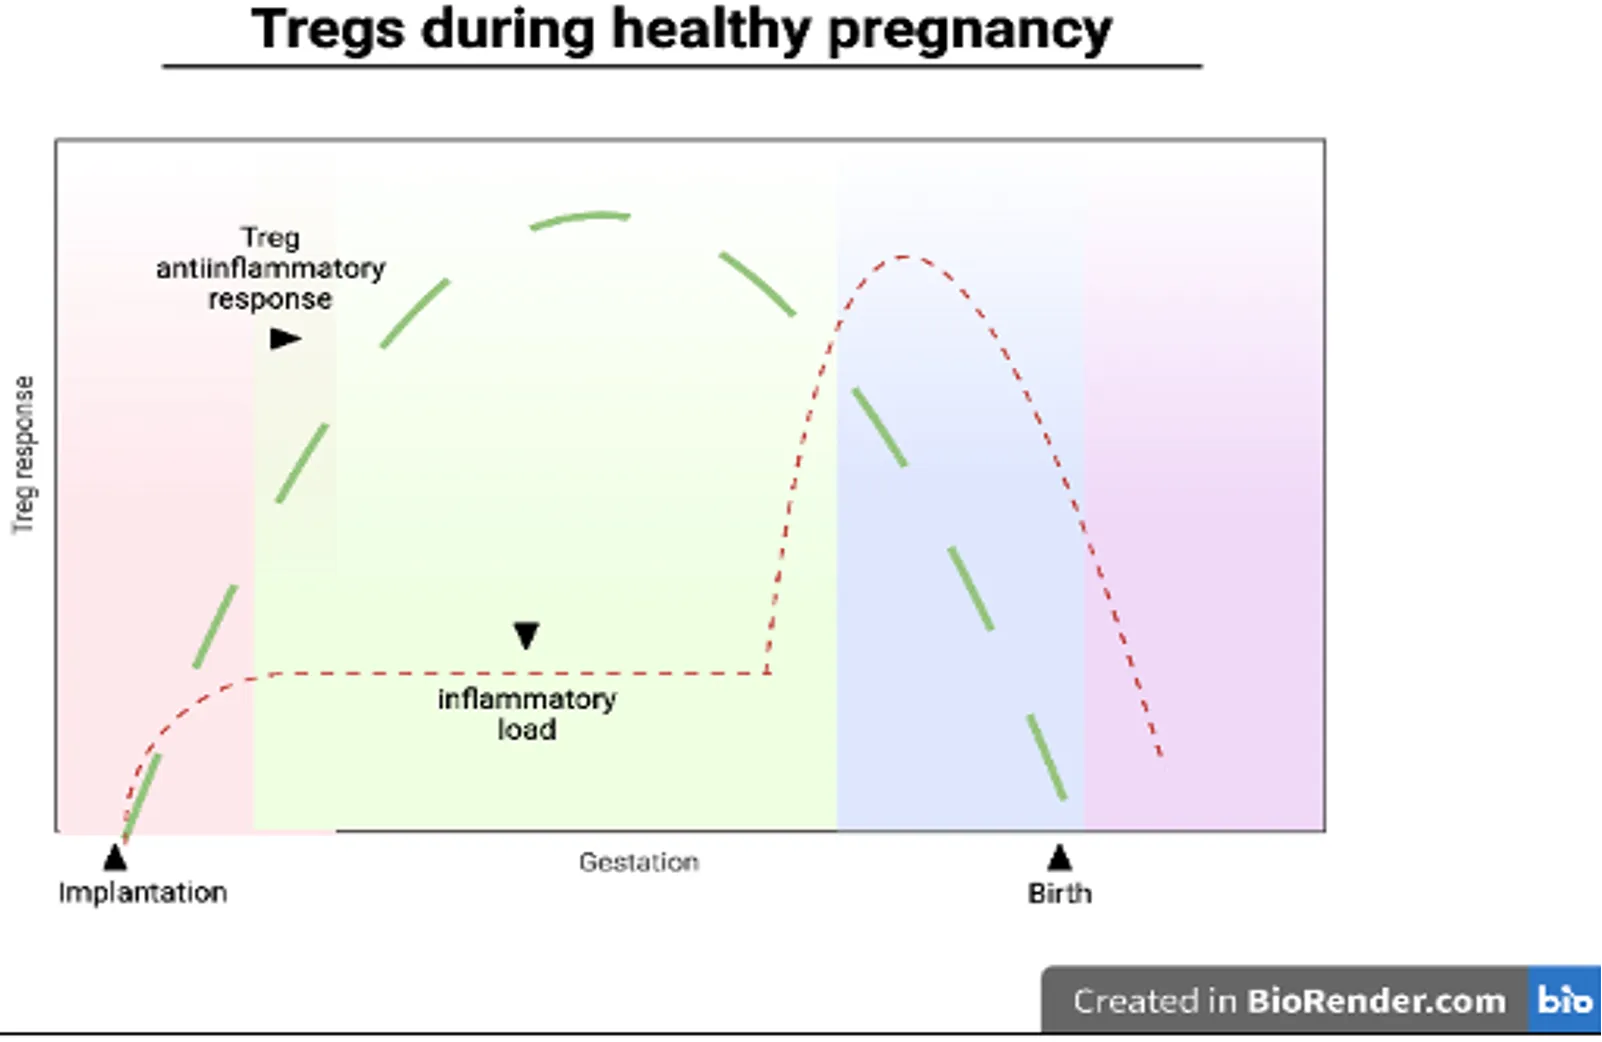 Tregs during healthy pregnancy